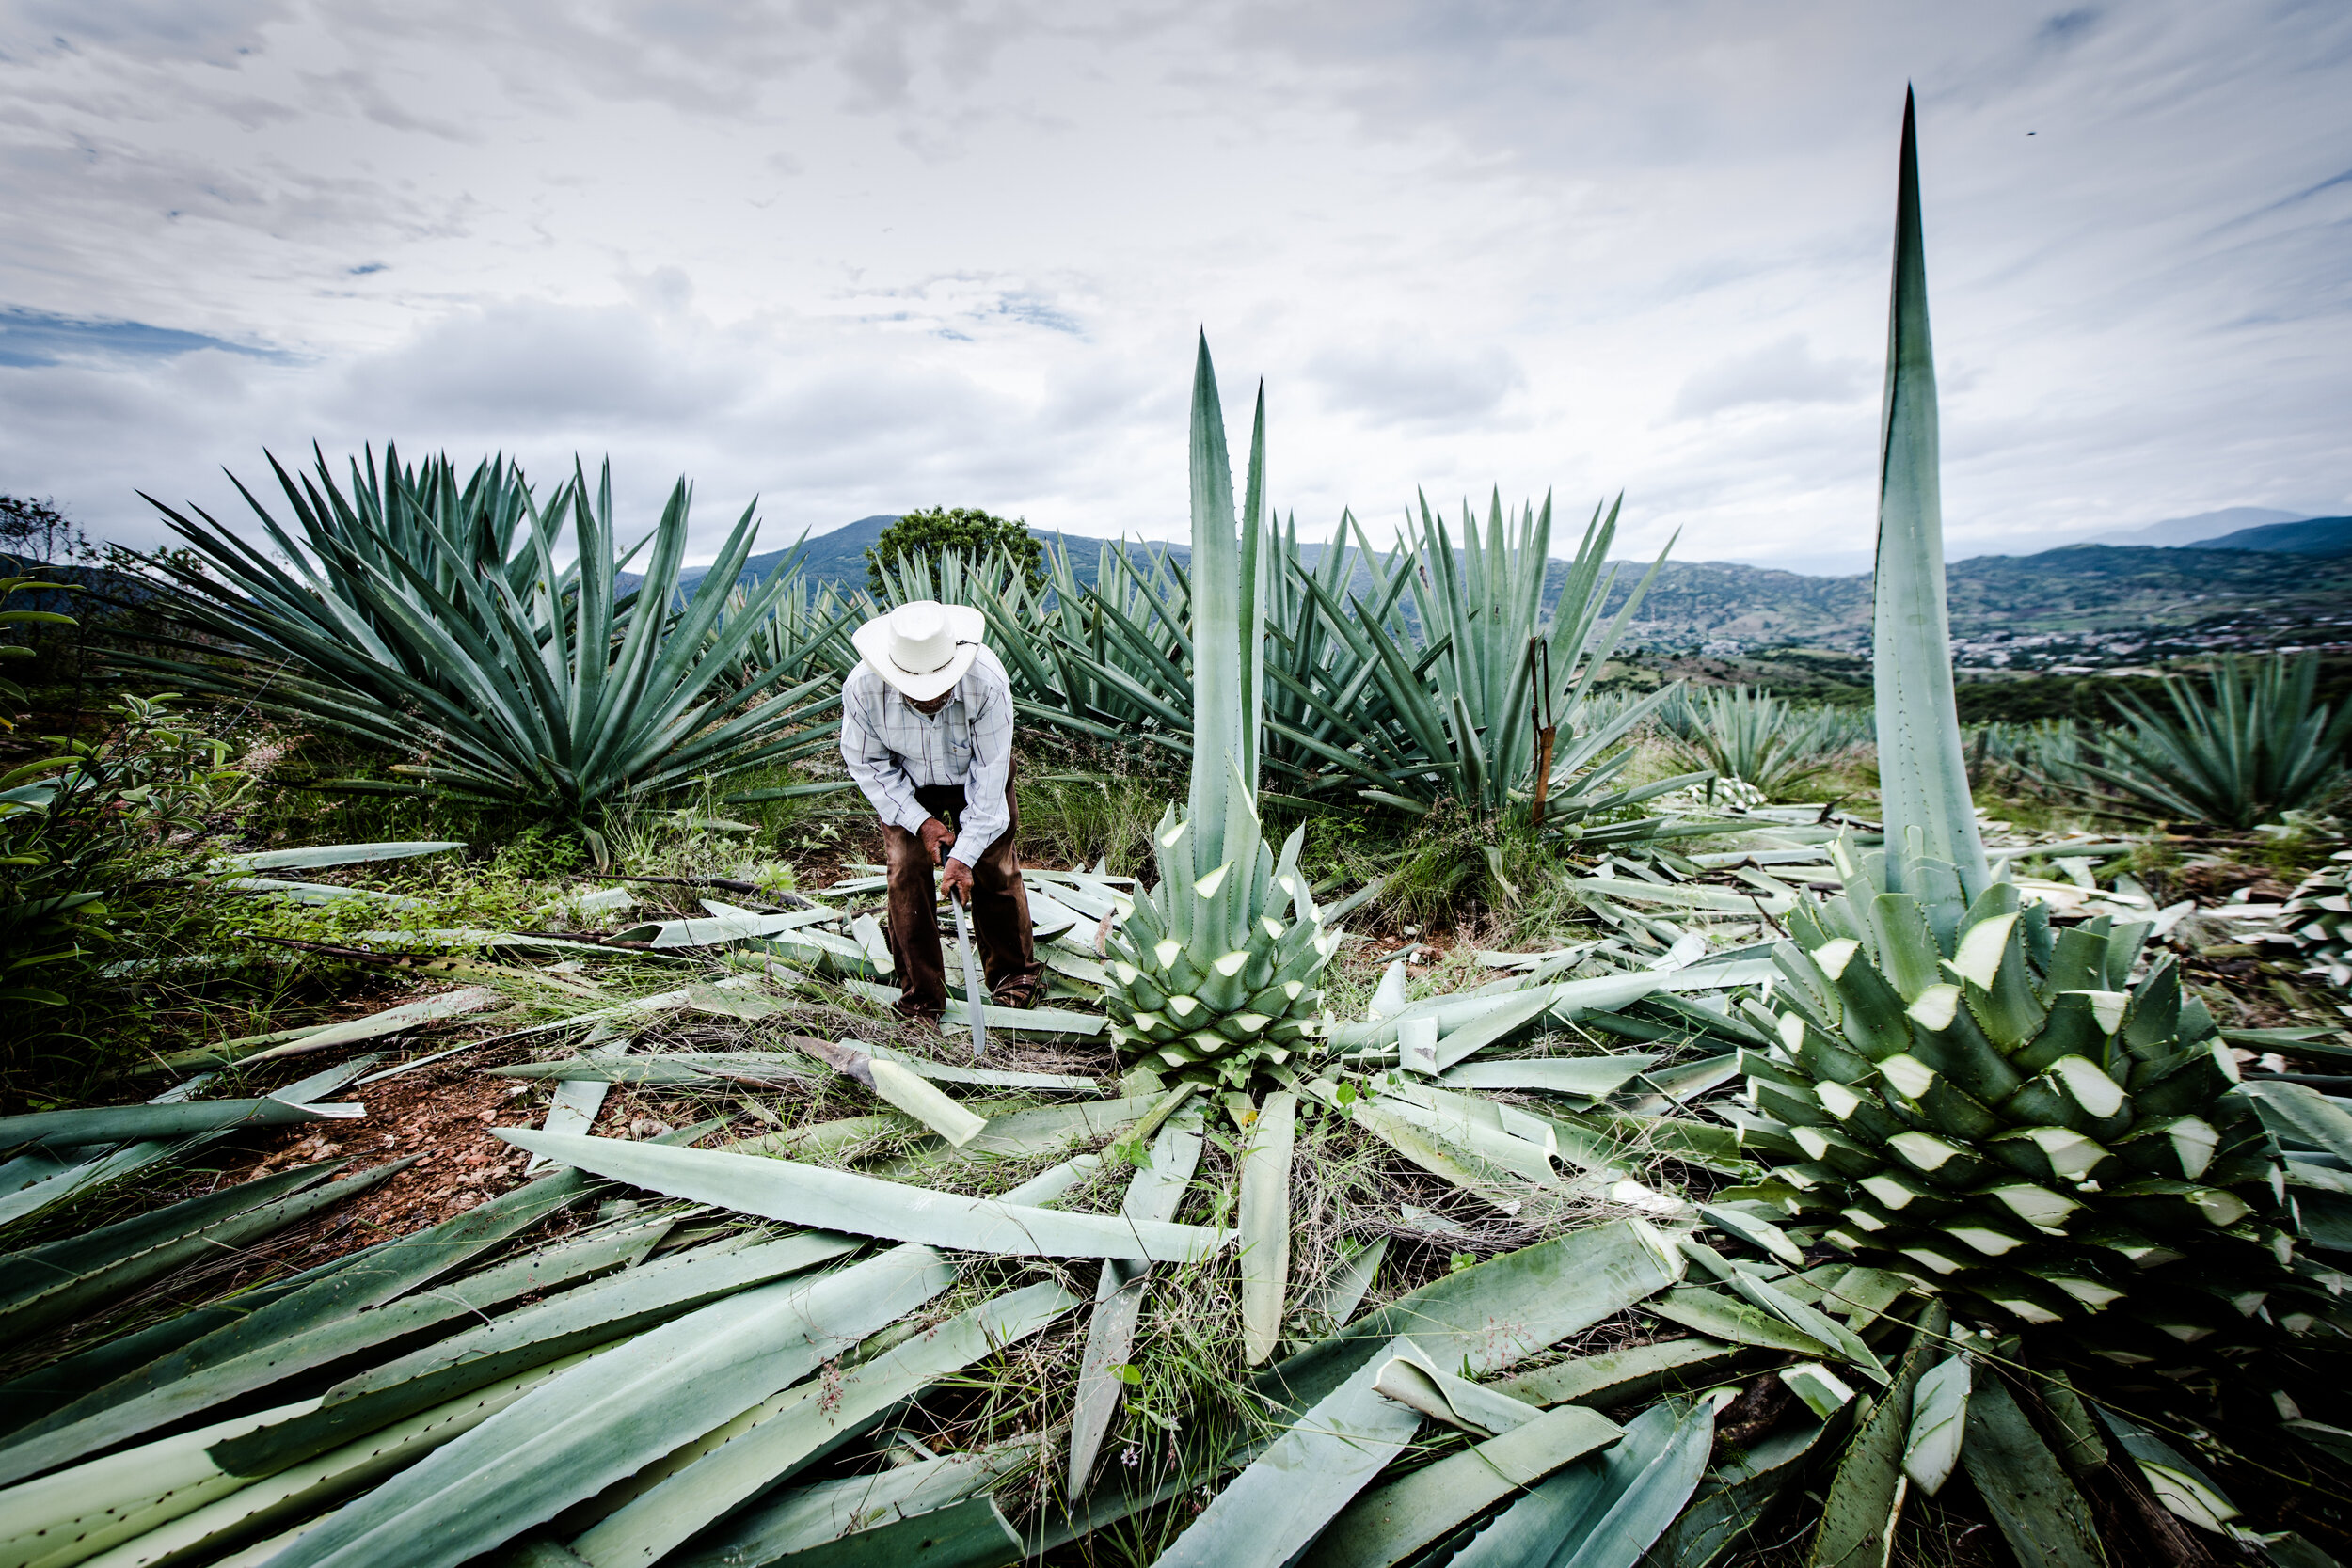  harvesting 7 to 9 years old agave plants to transform their juice into Mezcal using centuries-old traditional methods. San Baltazar Guelavila, Oaxaca, Mexico, August 2017 